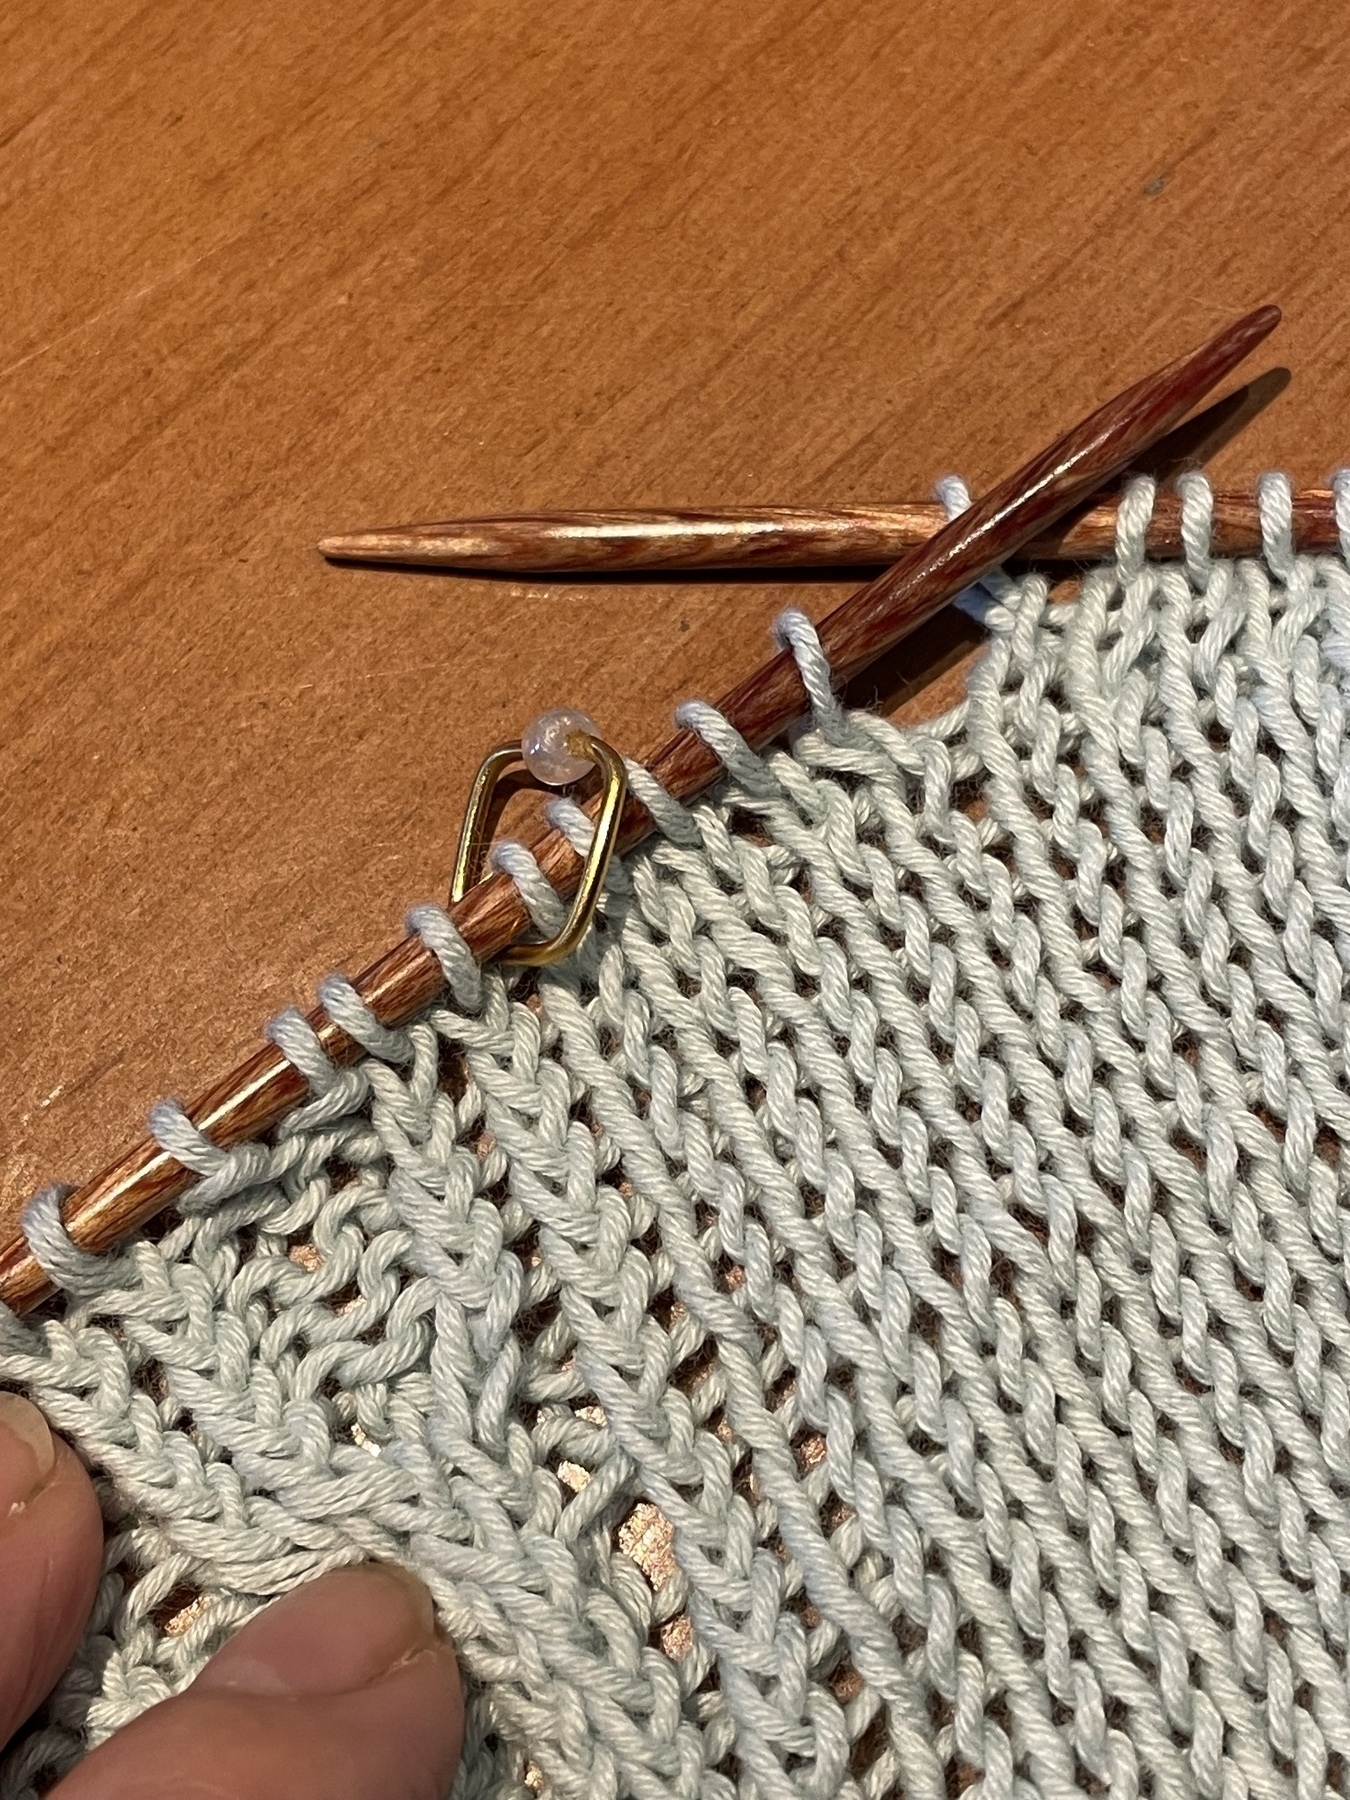 A knitting work in progress on the needles with a square-shaped  handmade stitch marker sitting in between stitches 